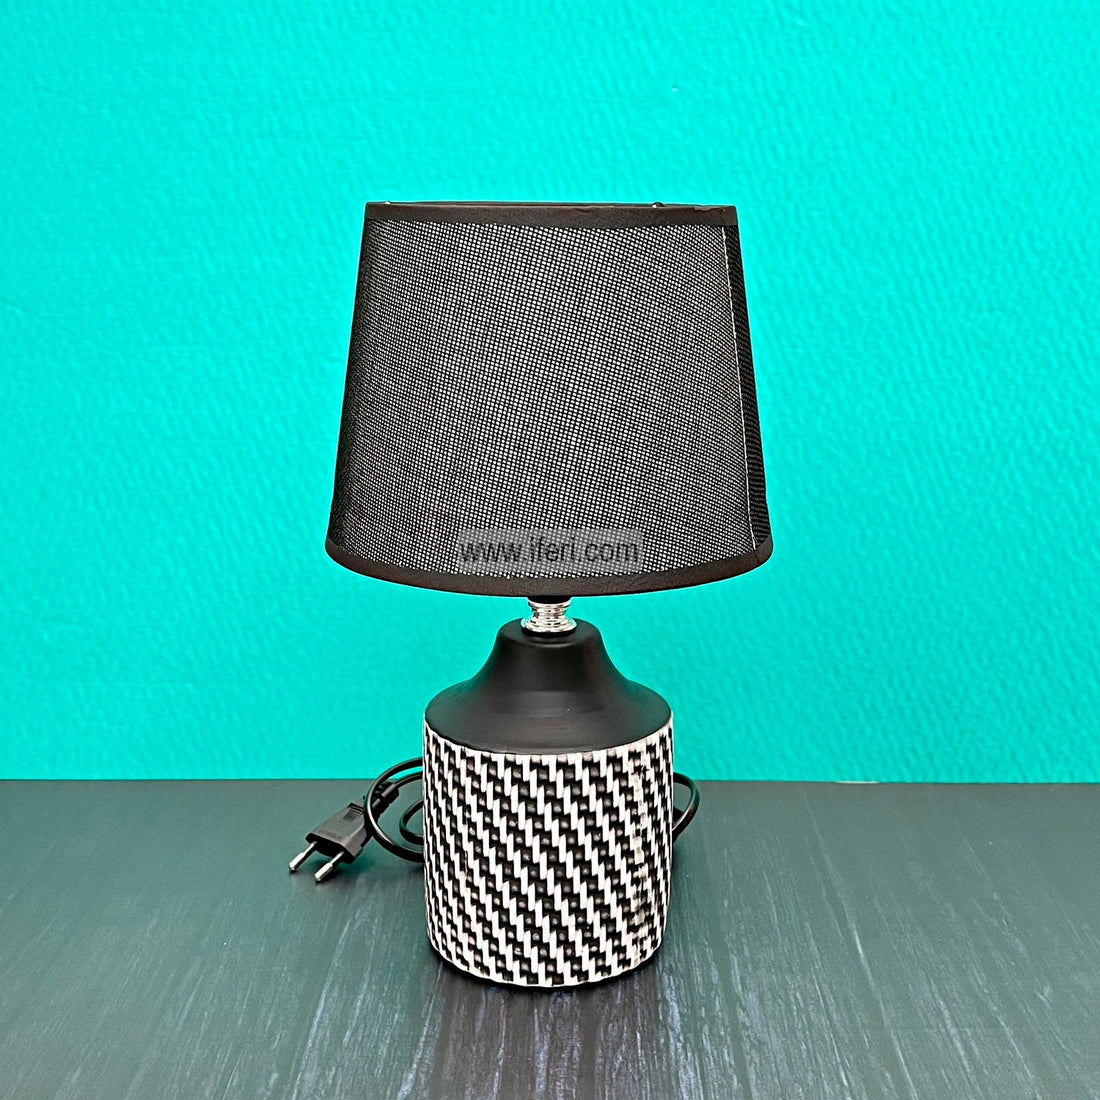 12 Inch Ceramic Table Lamp Available in Bangladesh 